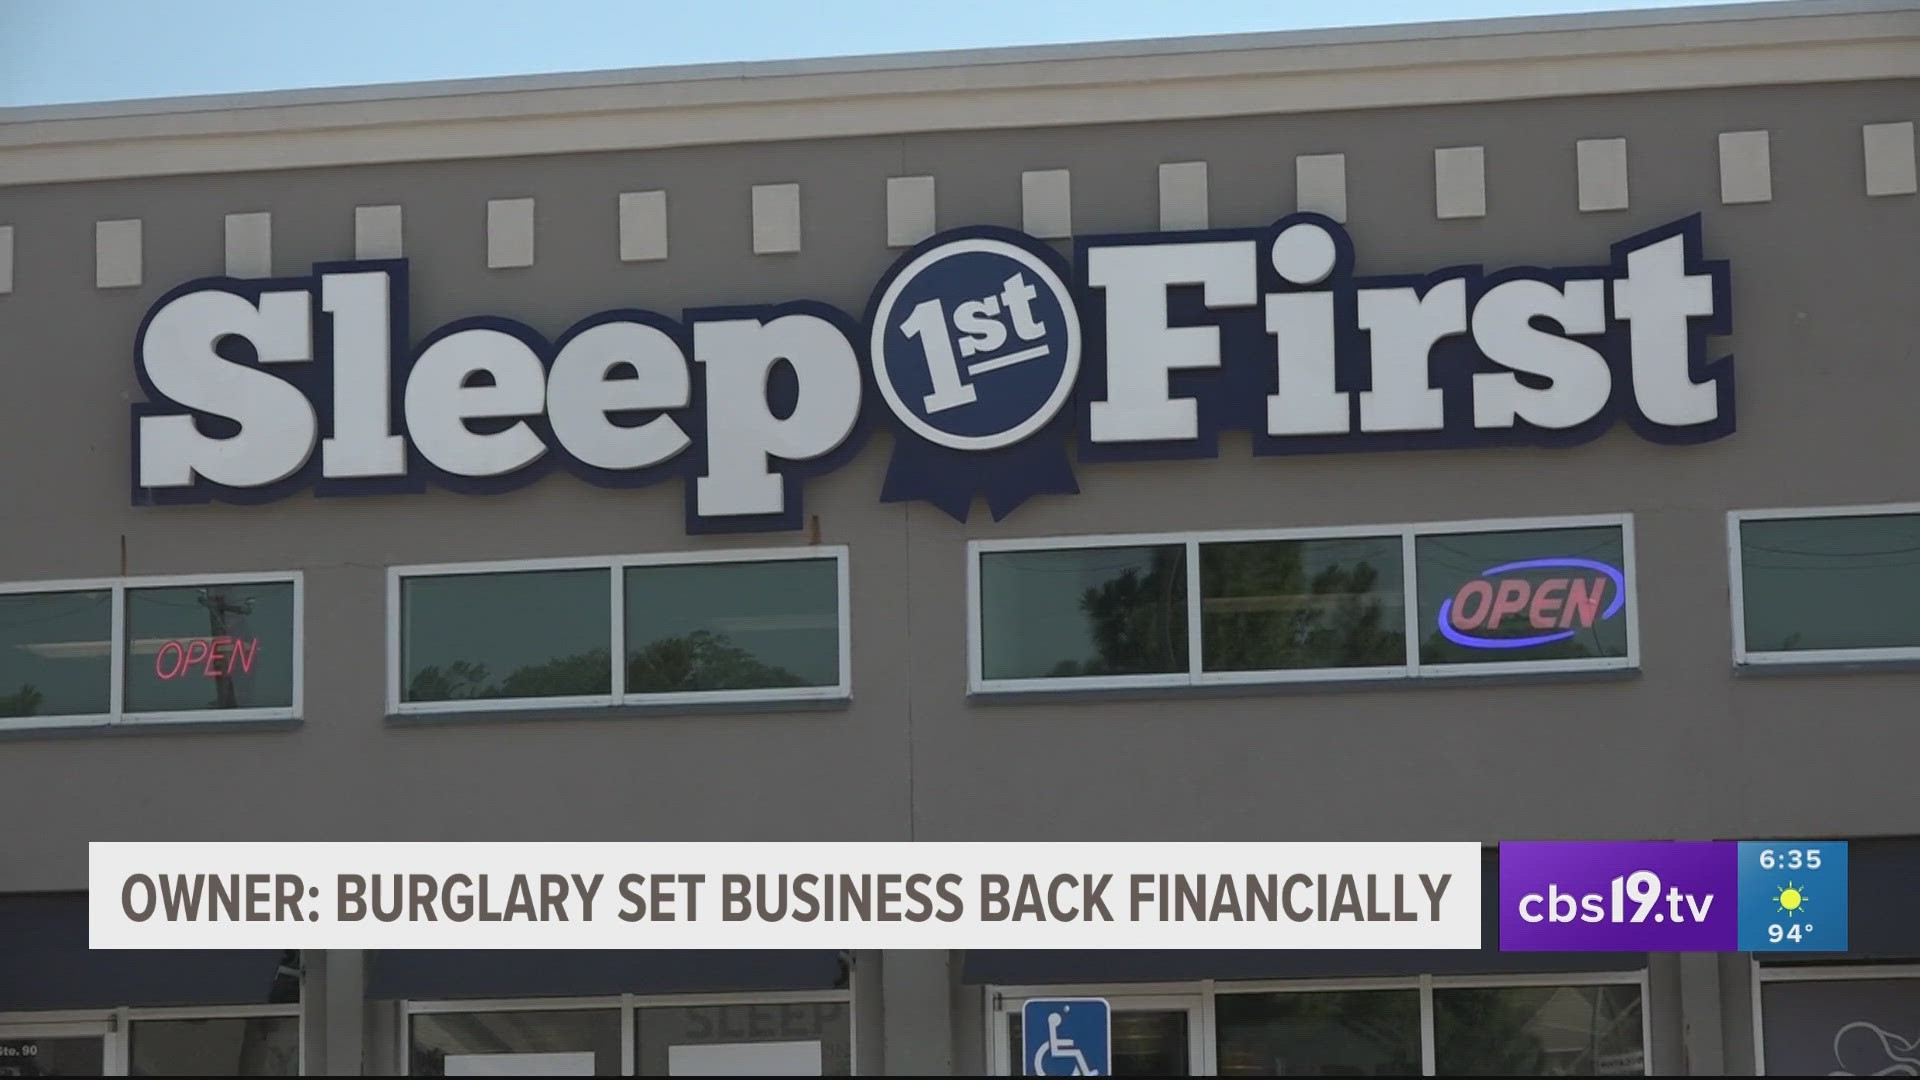 Owner of Sleep First Mattress, Ryan Benson said this is the fourth time they've experienced a burglary and he believes his business is being targeted.